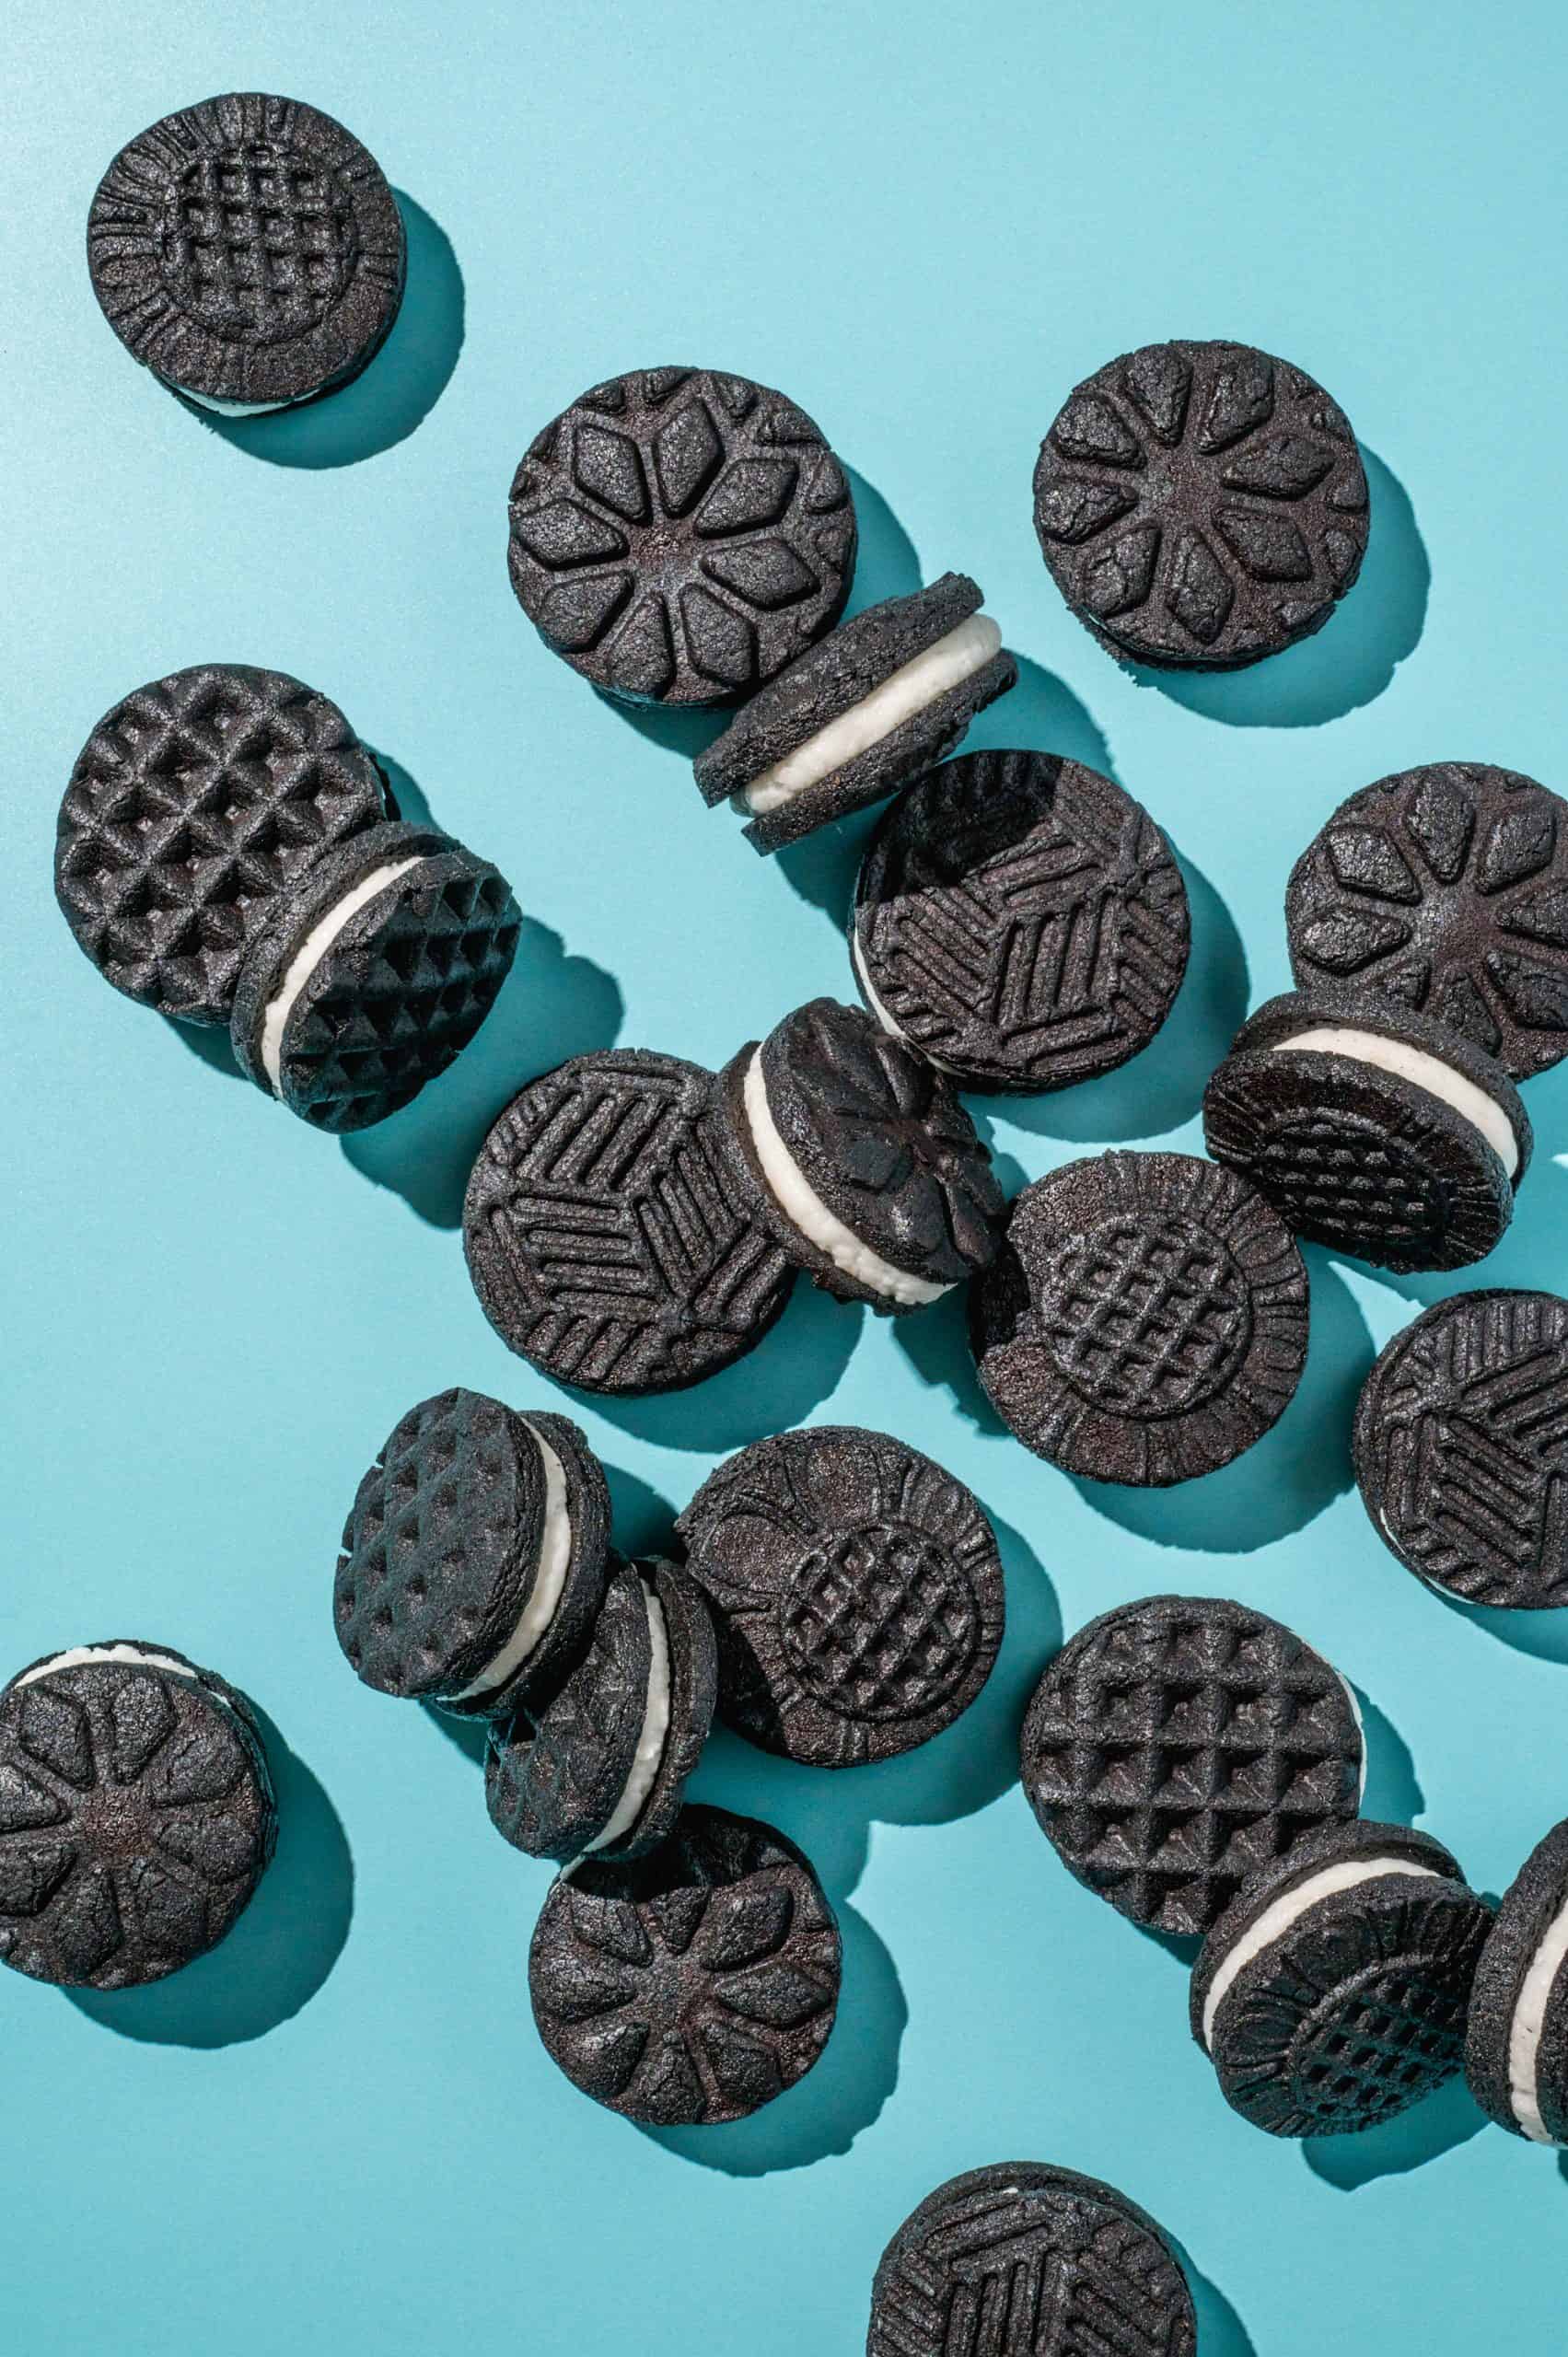 homemade oreo cookies with various stamped patterns on blue background